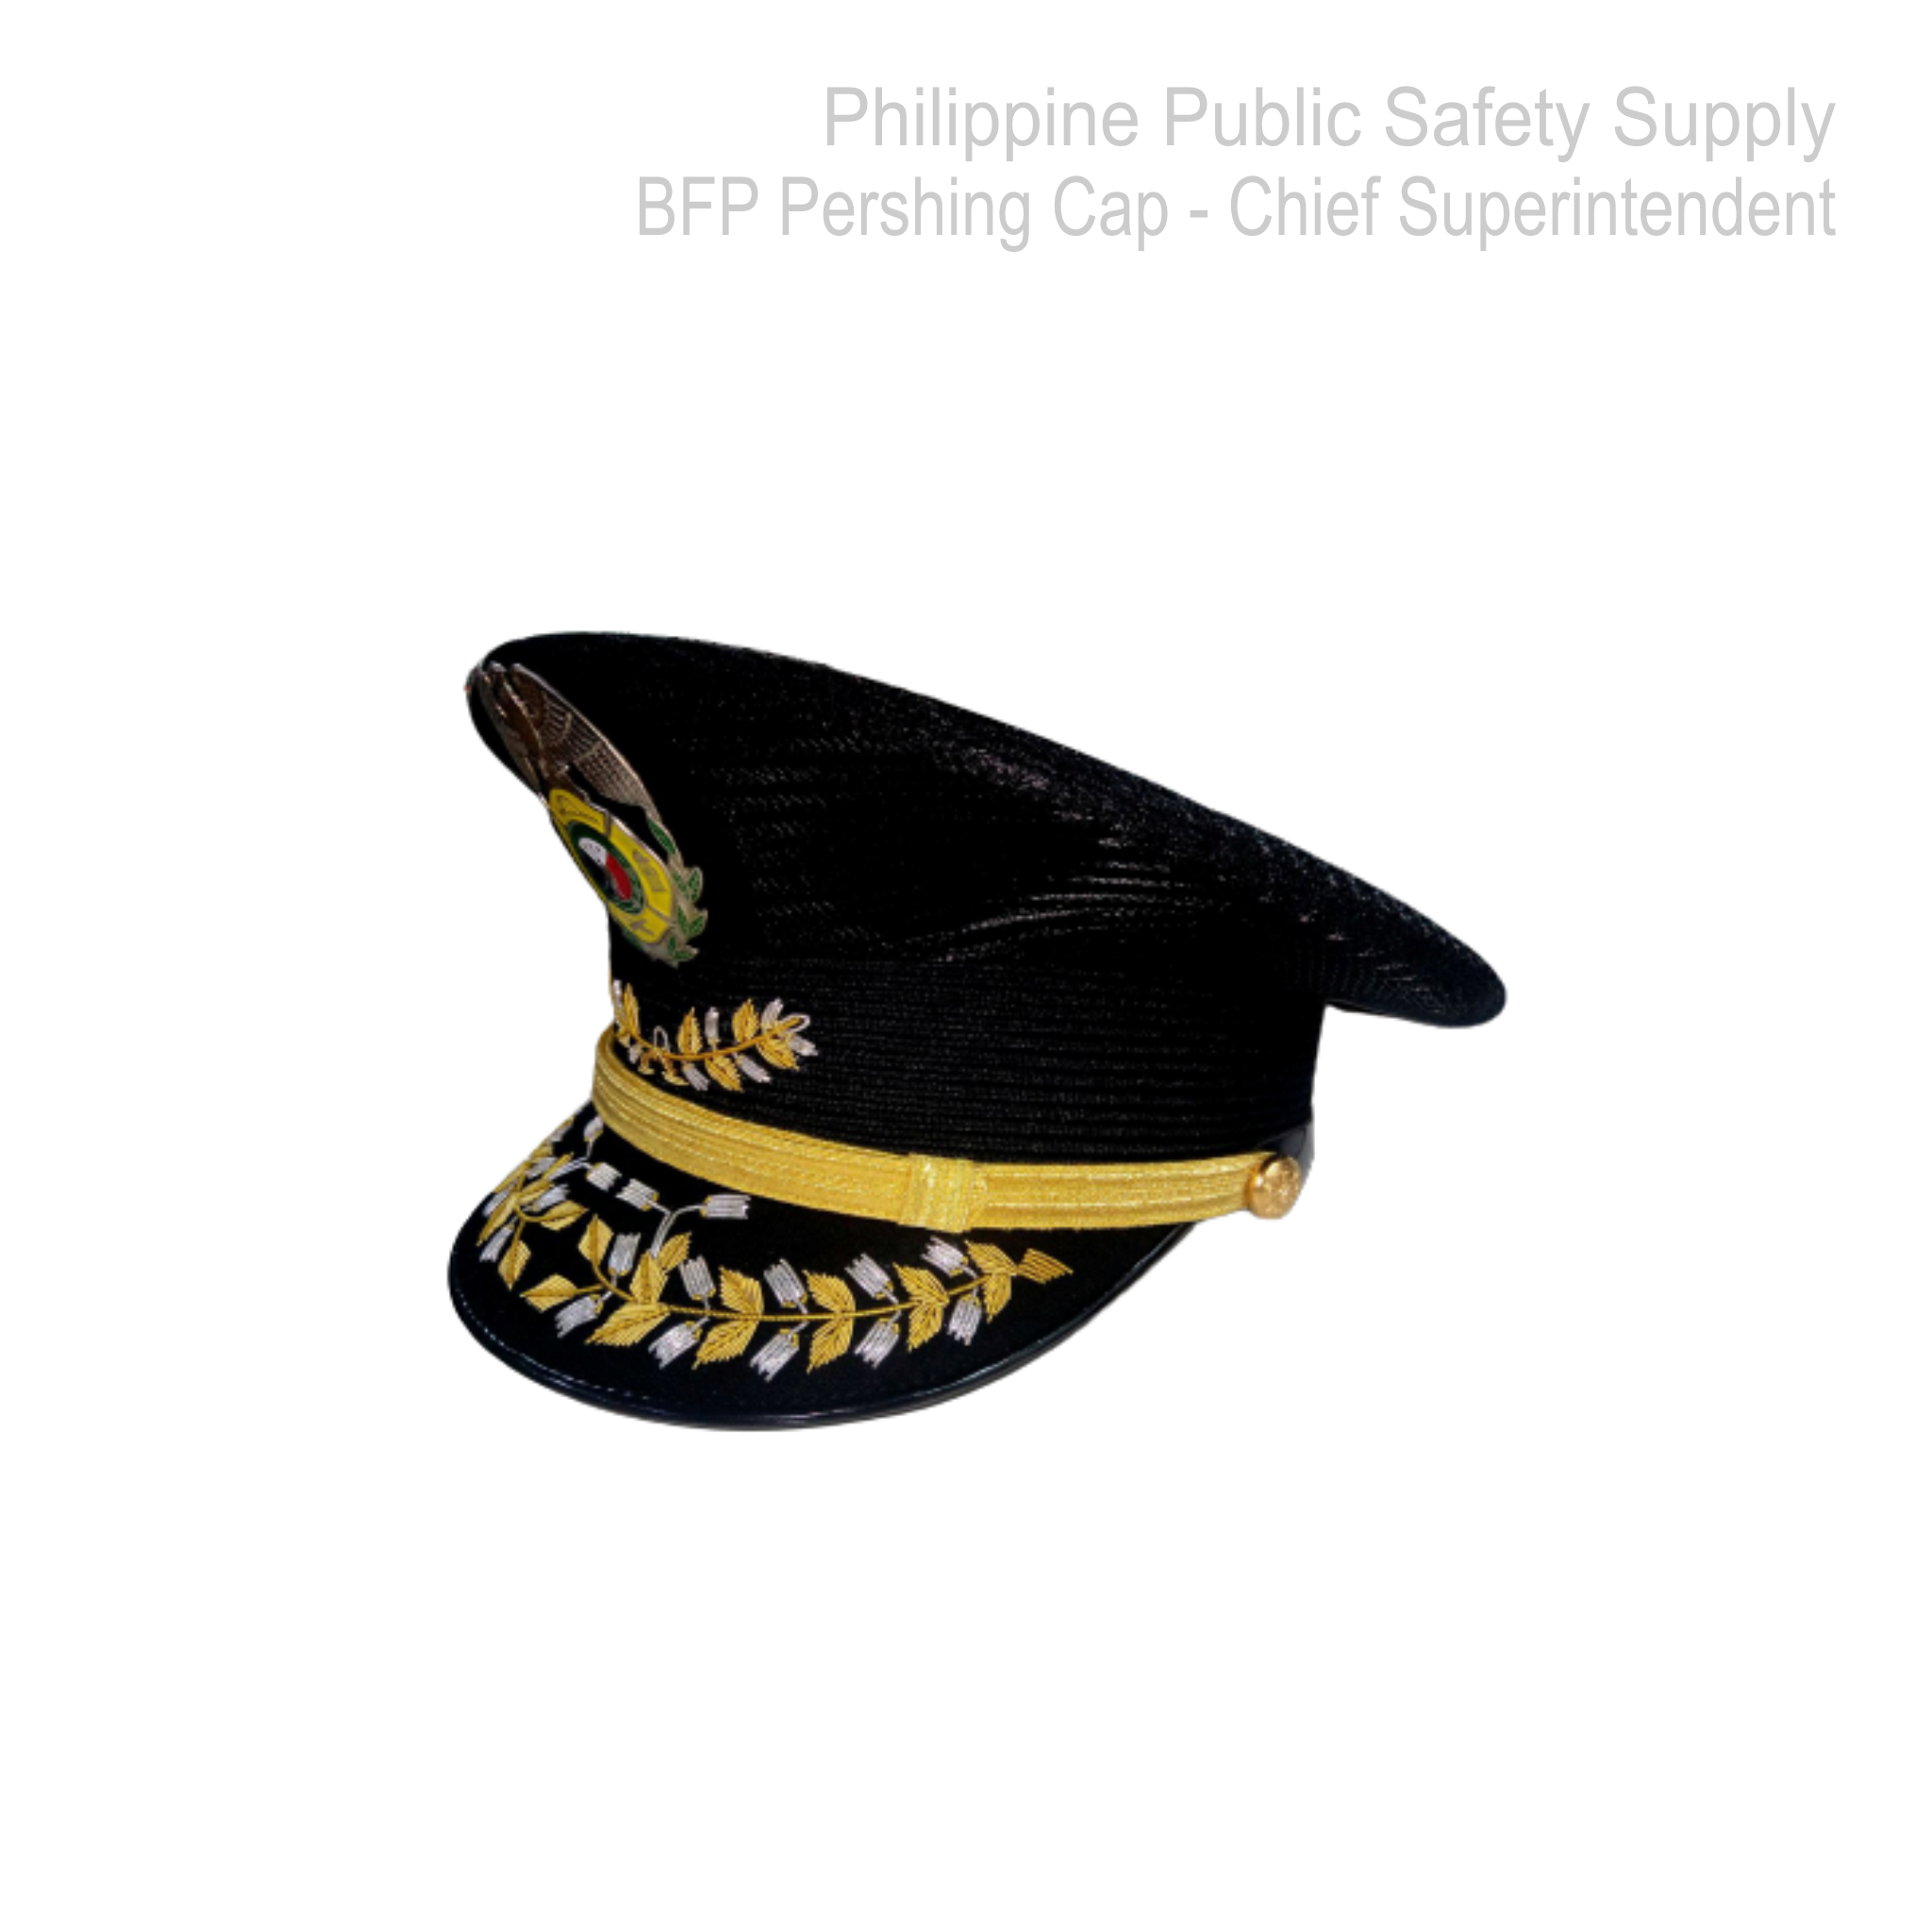 Bureau of Fire Protection (BFP) Pershing Cap Chief Superintendent - BFP